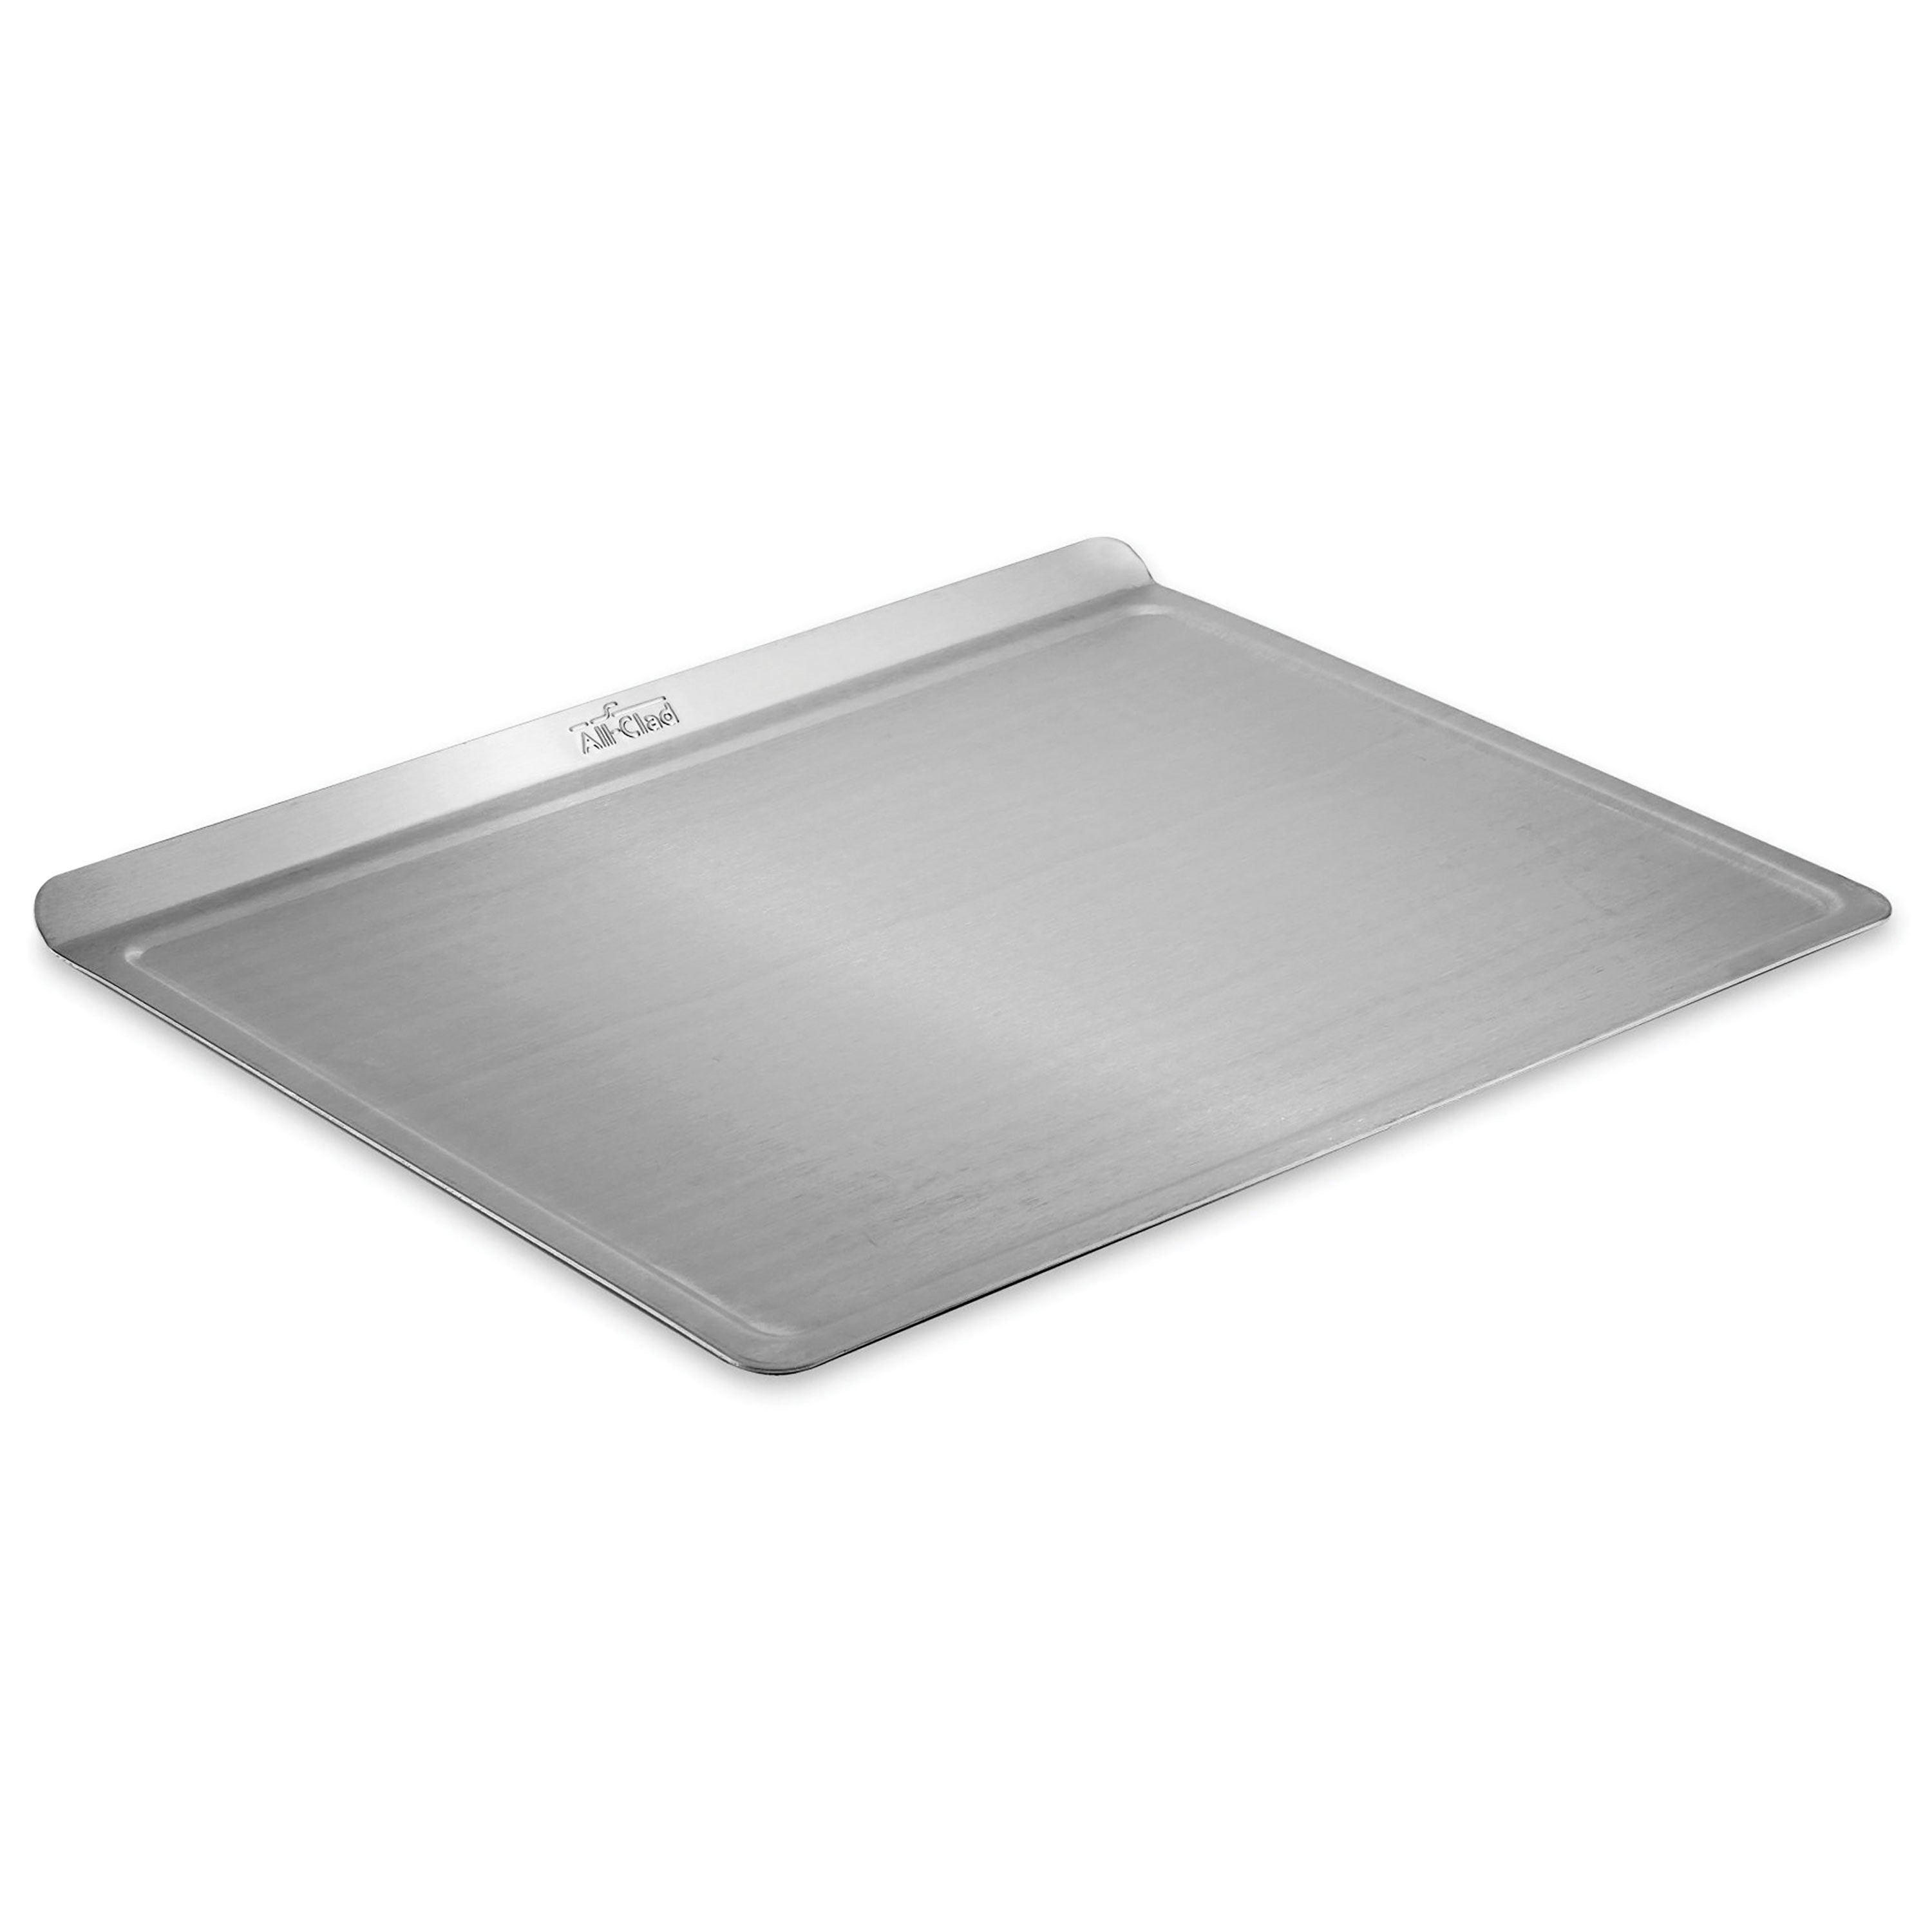 14-Inch x 17-Inch D3 Stainless Steel Roasing Sheet I All-Clad